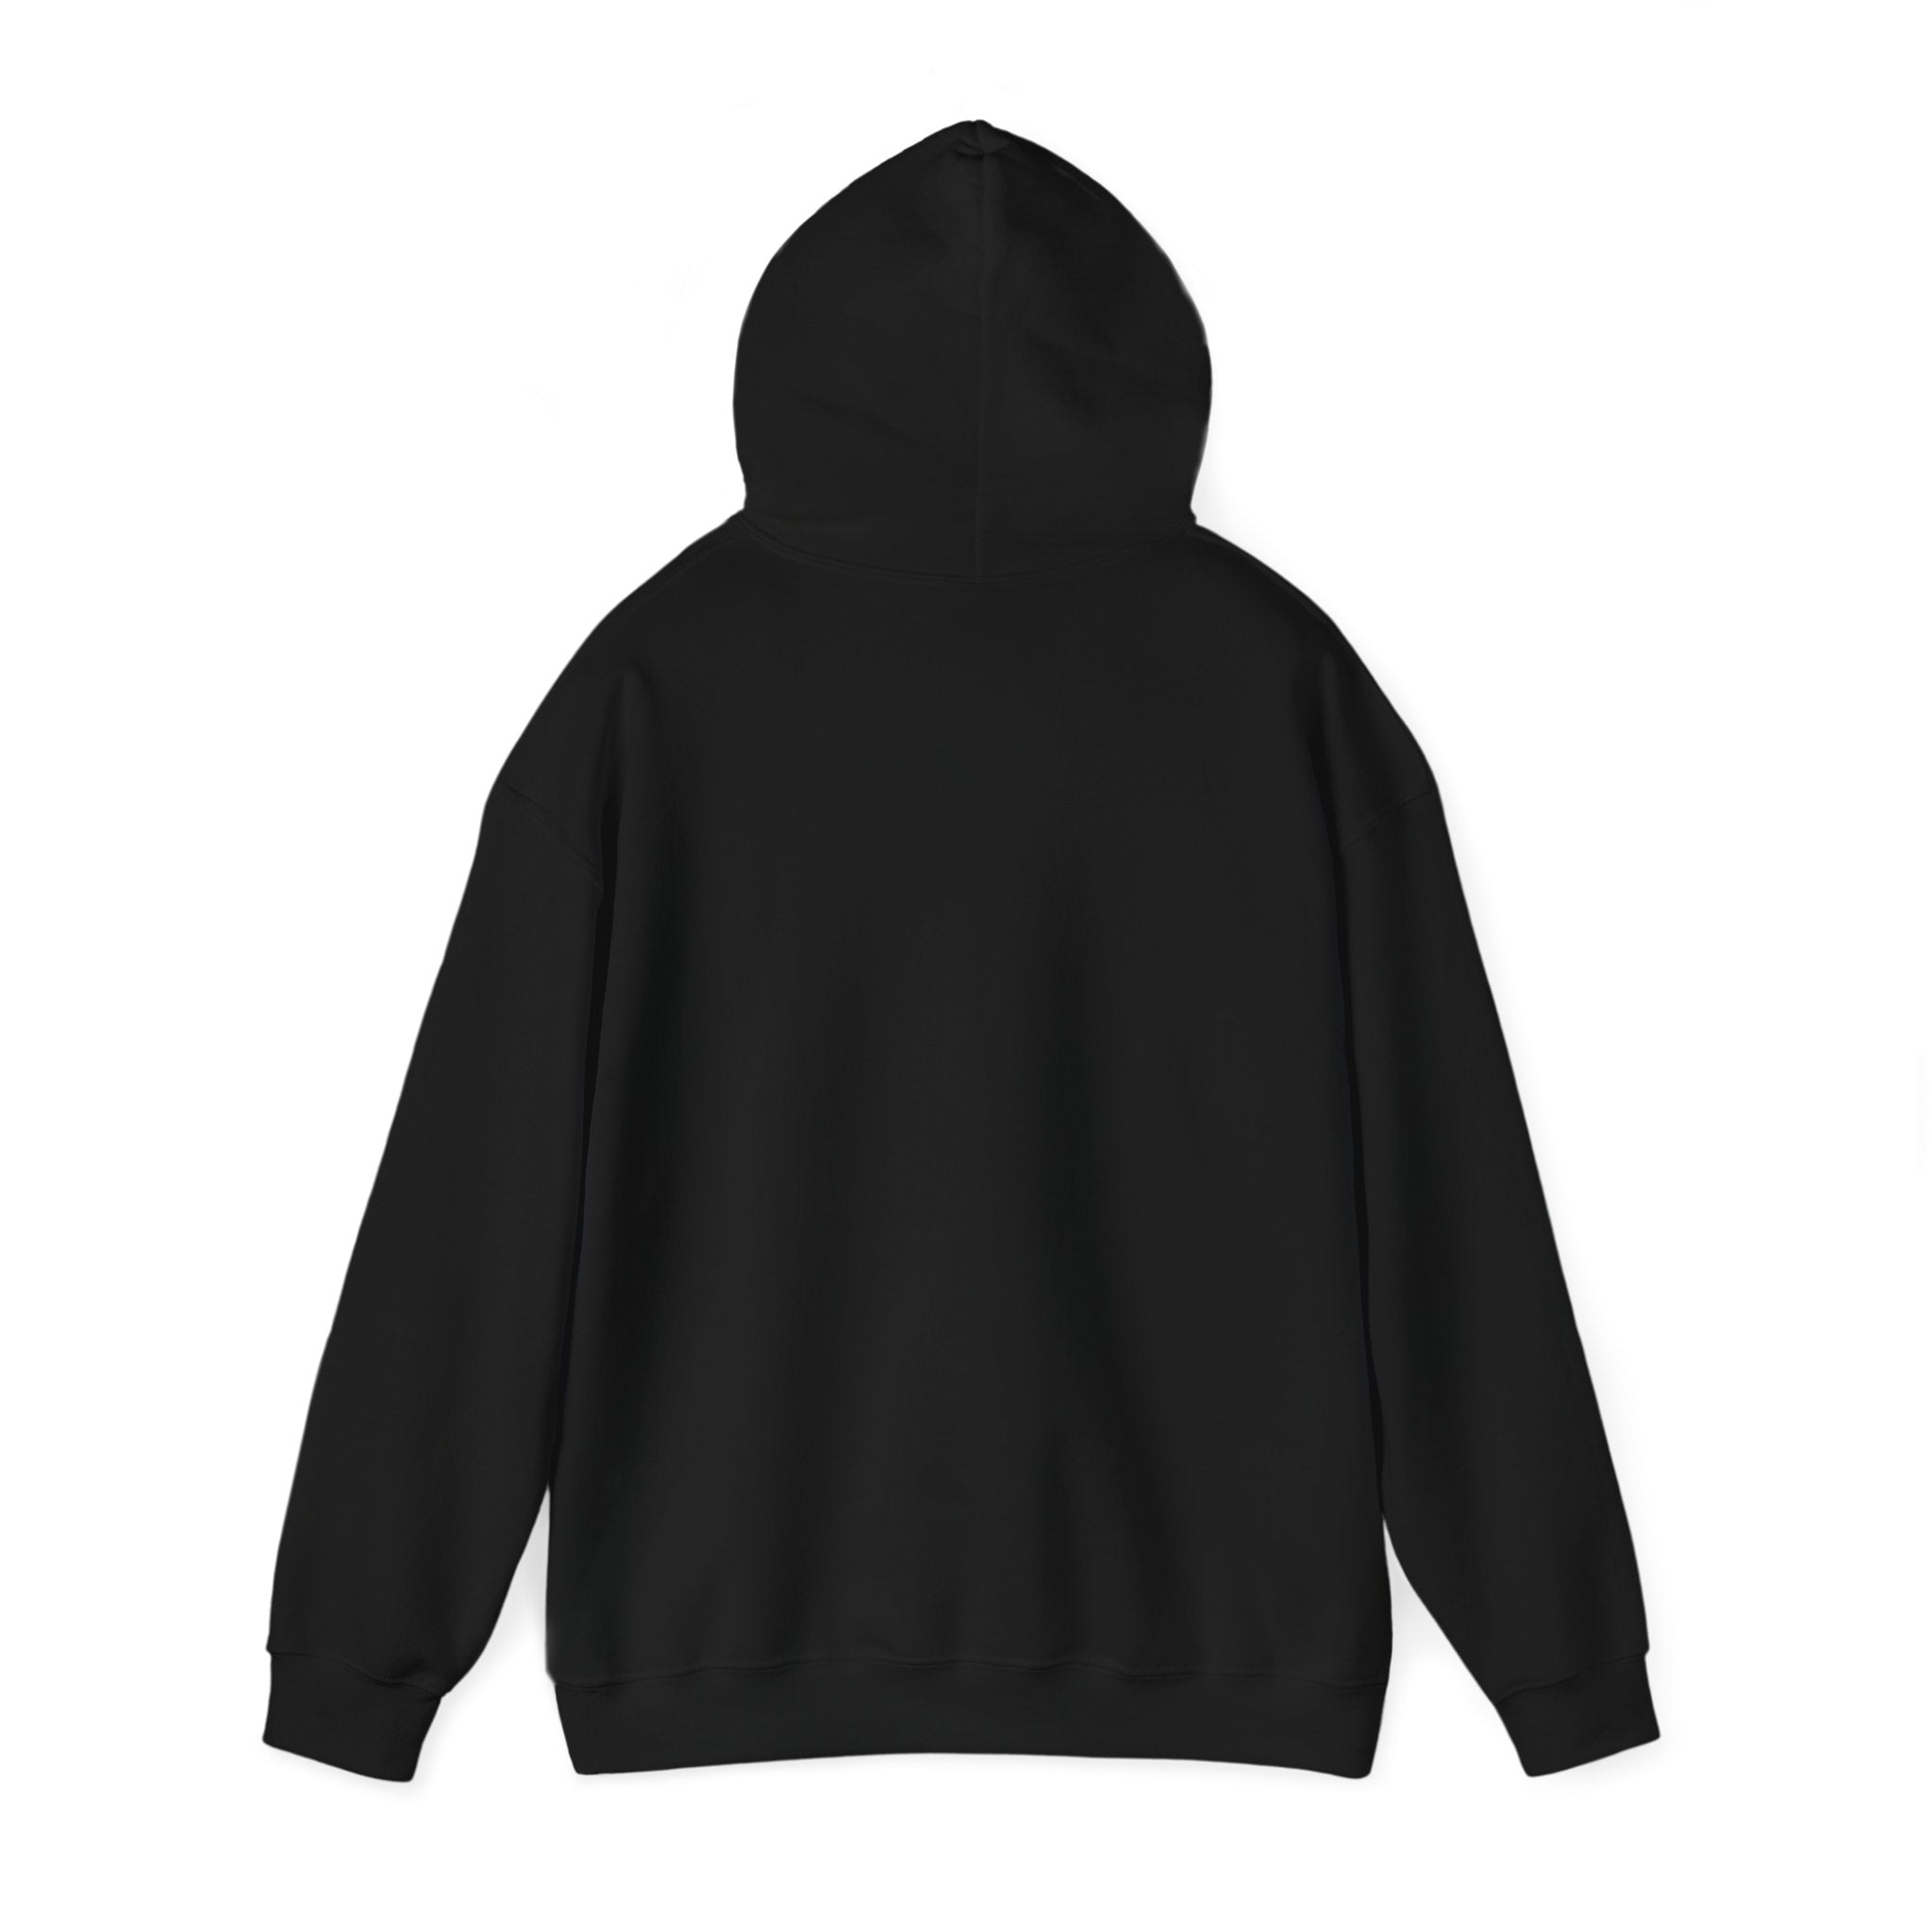 A plain black hooded sweatshirt is shown from the back, featuring a hood and long sleeves. The 100% cotton fabric appears soft and has a loose fit, embodying the LA-TI-NA - Hooded Sweatshirt design.